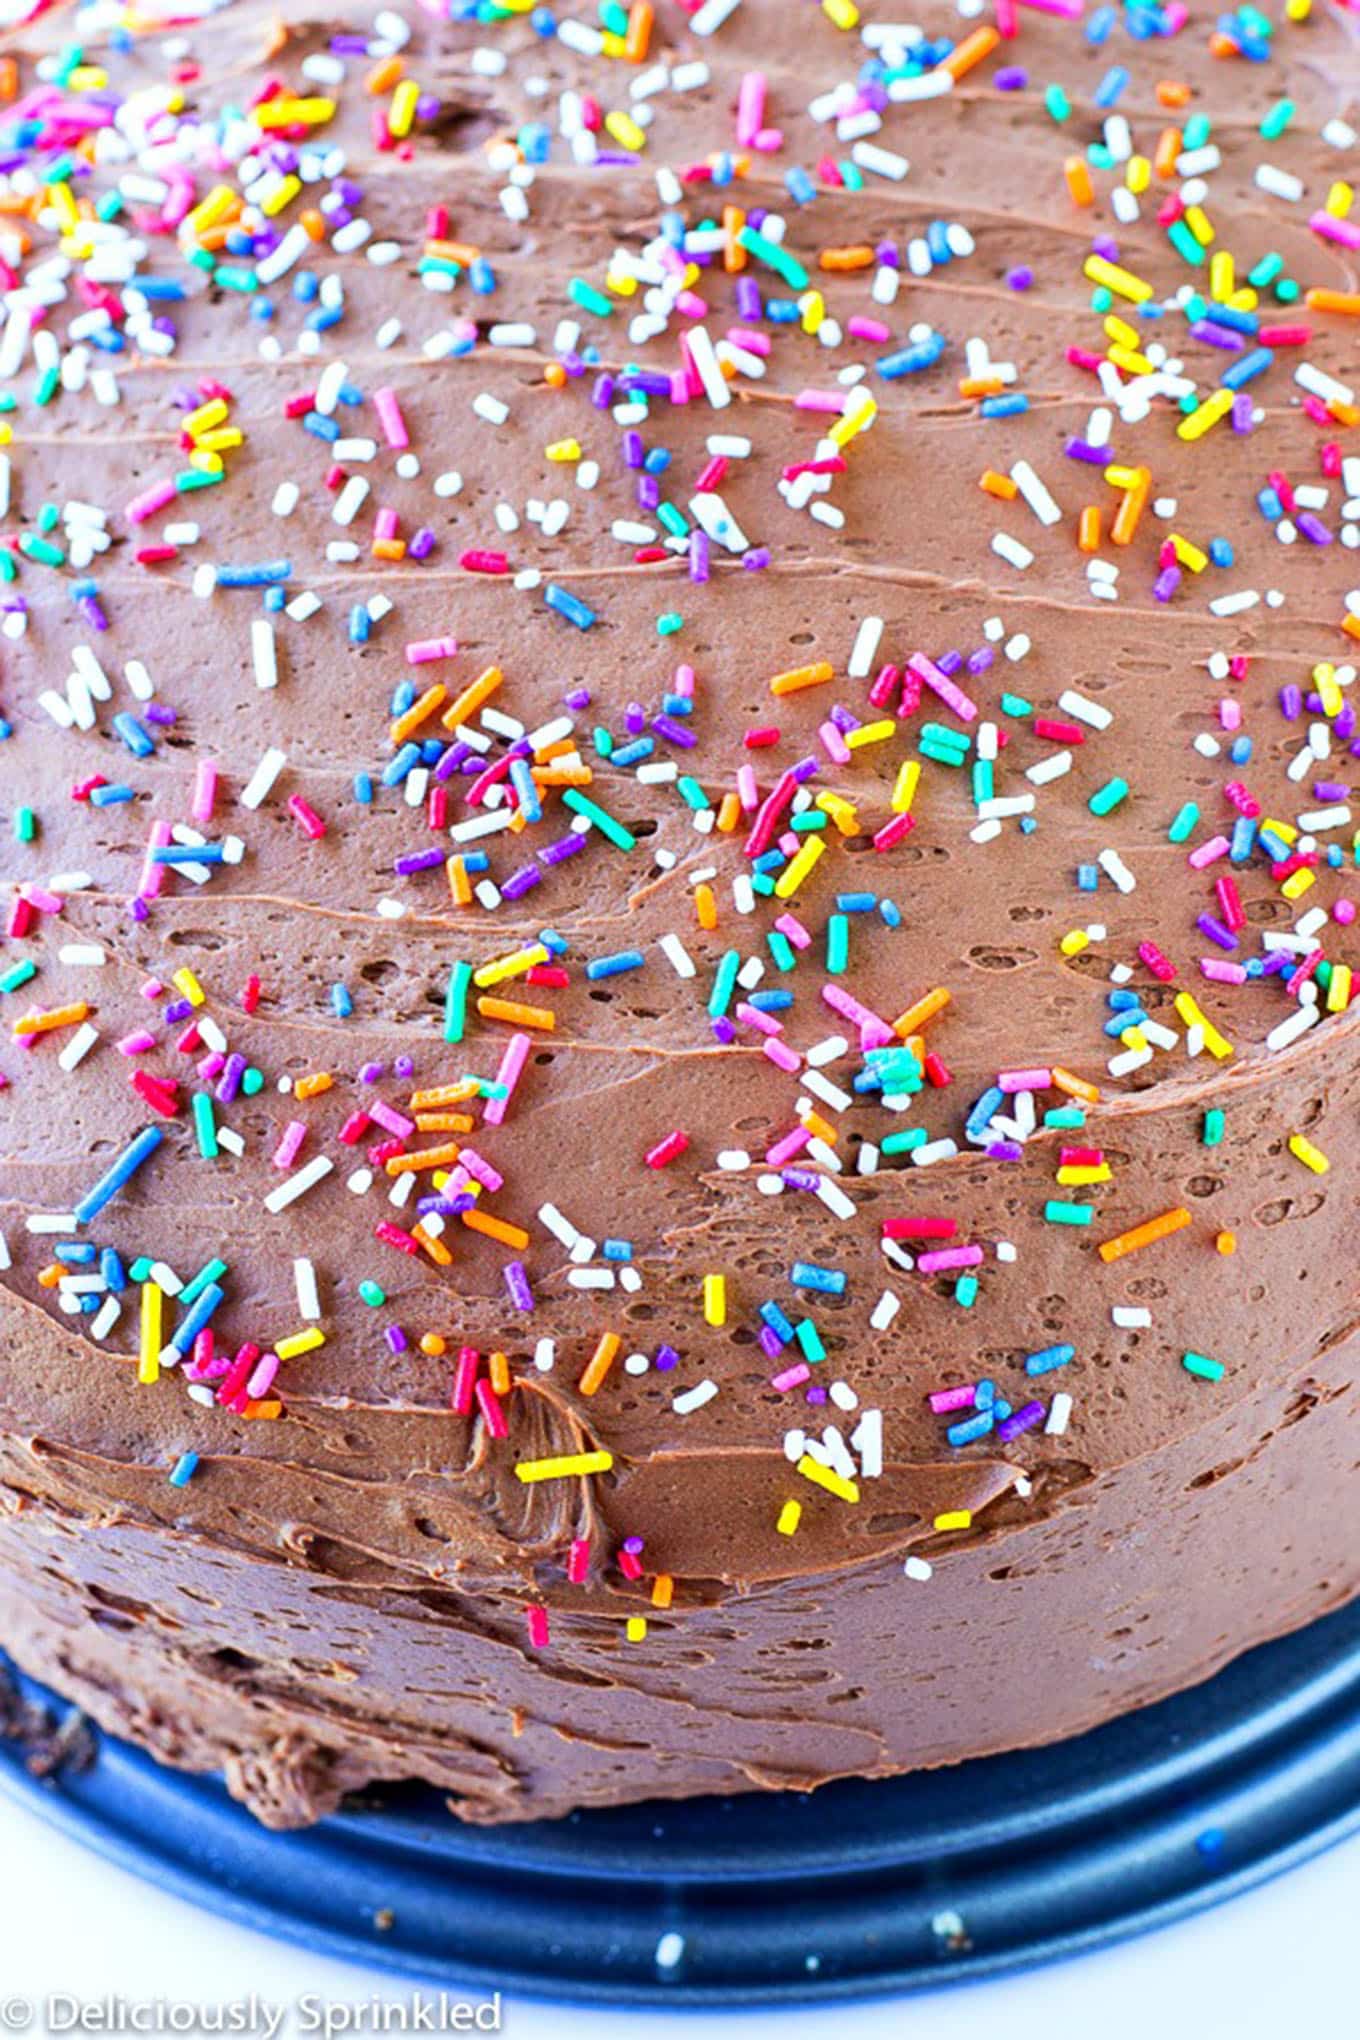 Chocolate frosting spread over a cake with sprinkles added.